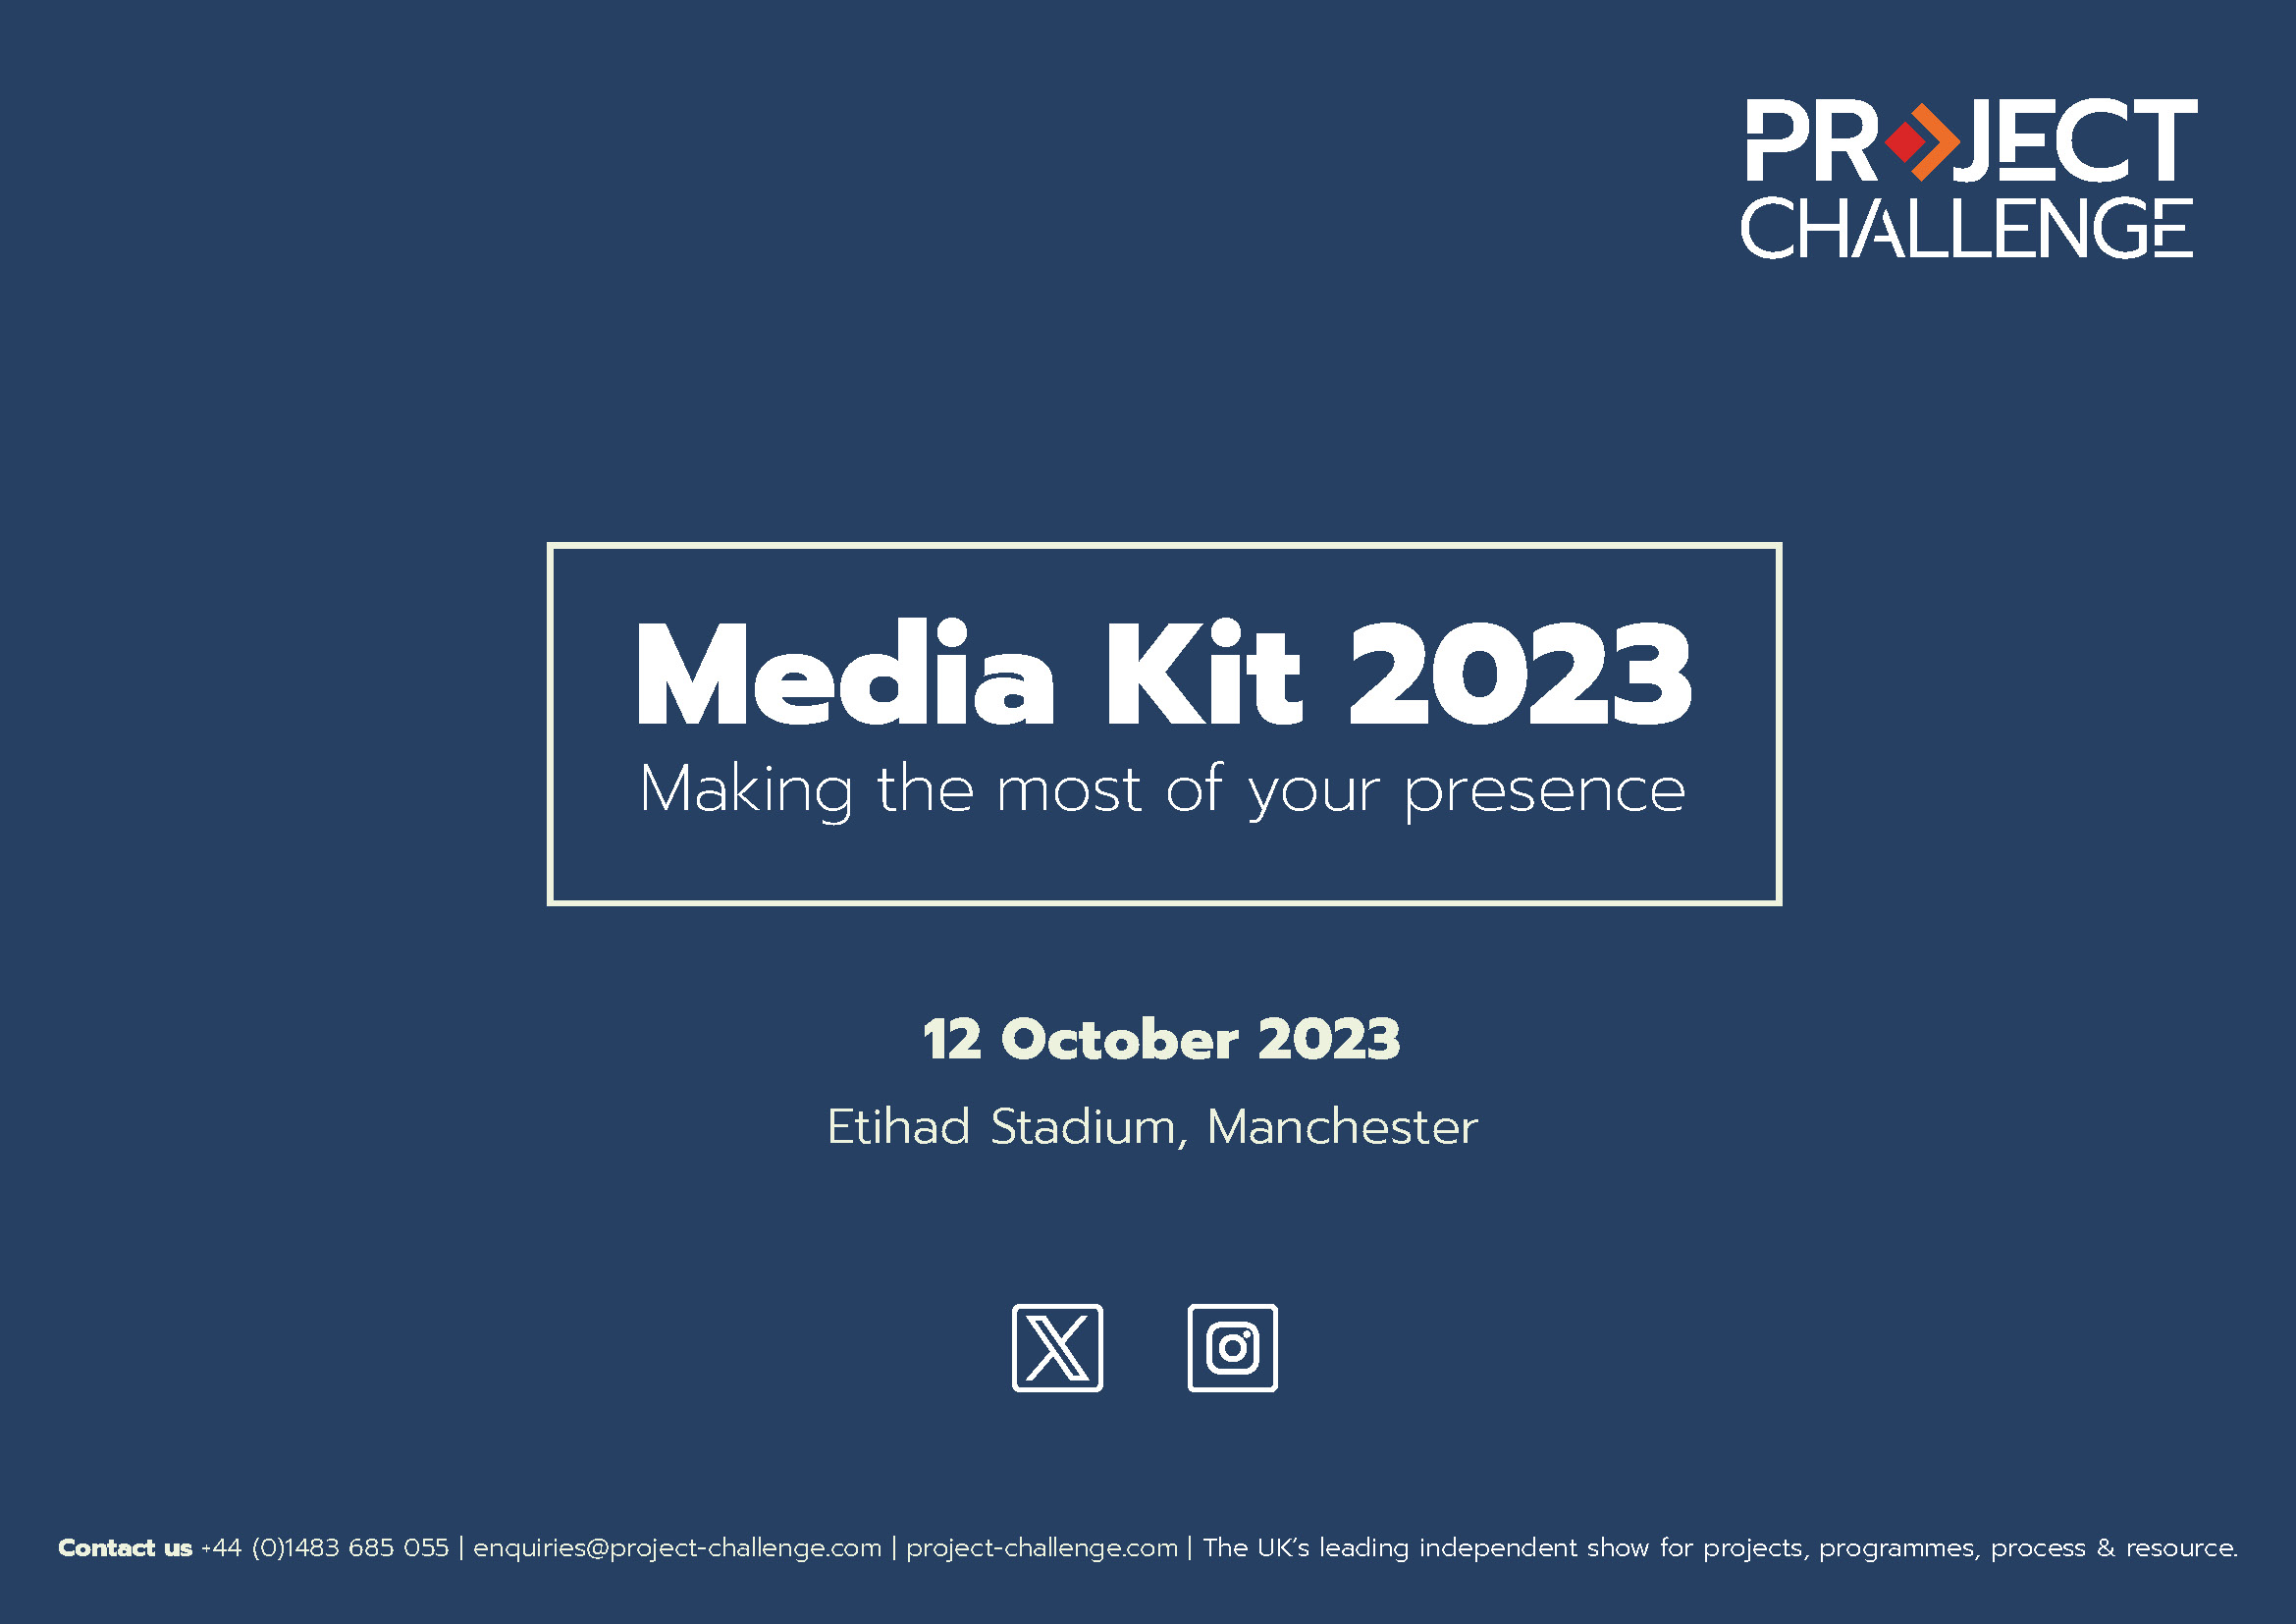 Project Challenge Manchester 2023 - Media Kit